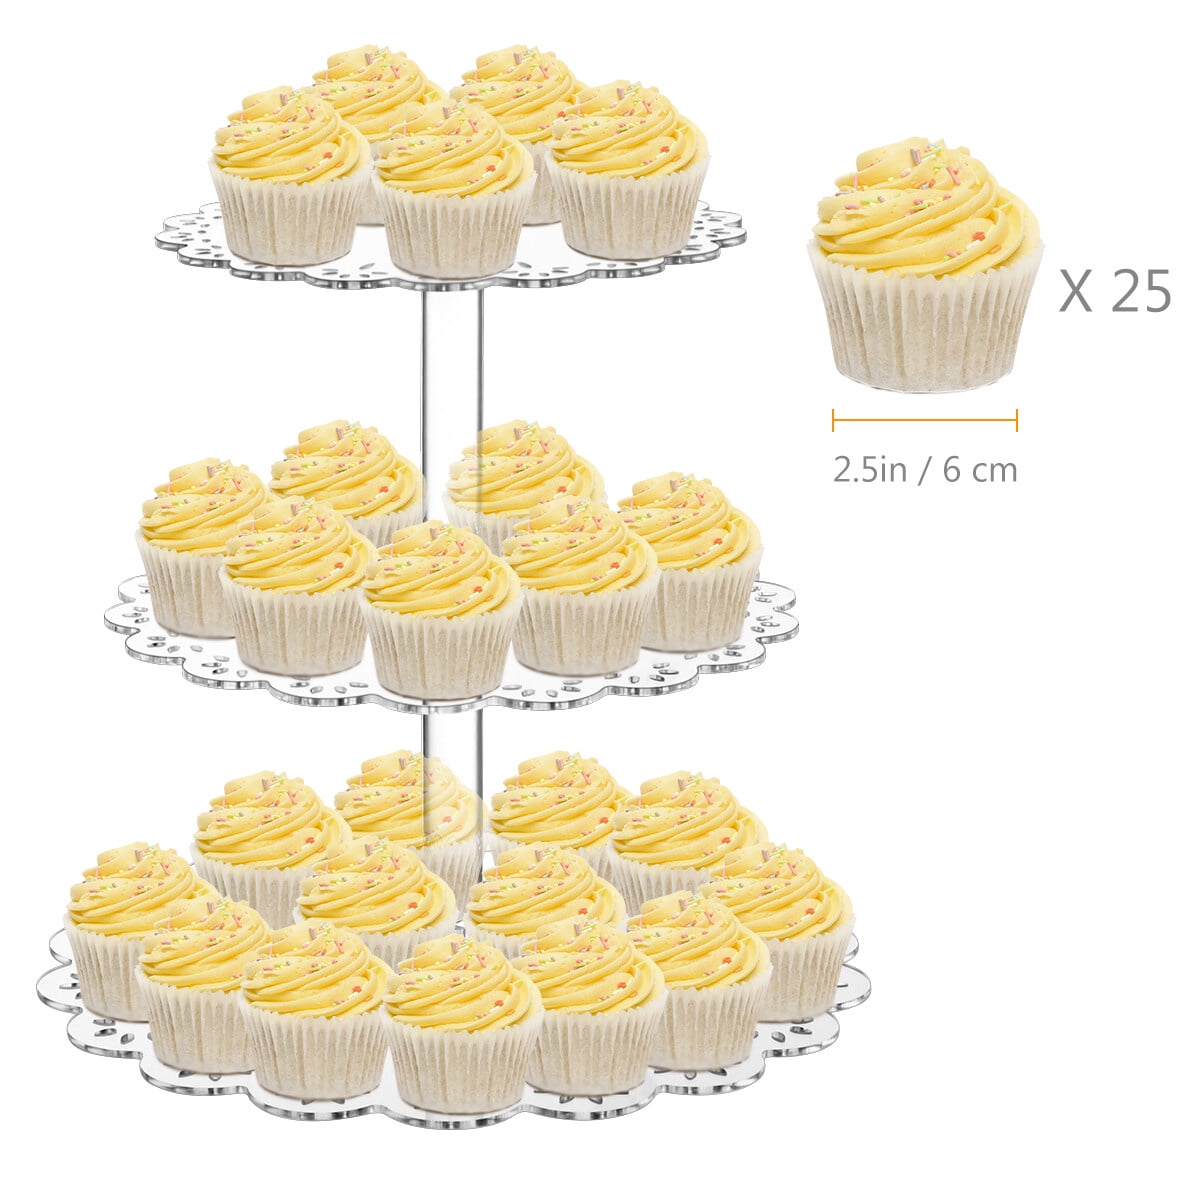 Tier Cupcake Stand, Acrylic Cupcake Tower Stand, Premium Cupcake Holder,  Clear Cupcake Display Tree Tower Stand for 25 Cupcakes, Display for Wedding  Birthday Pastry